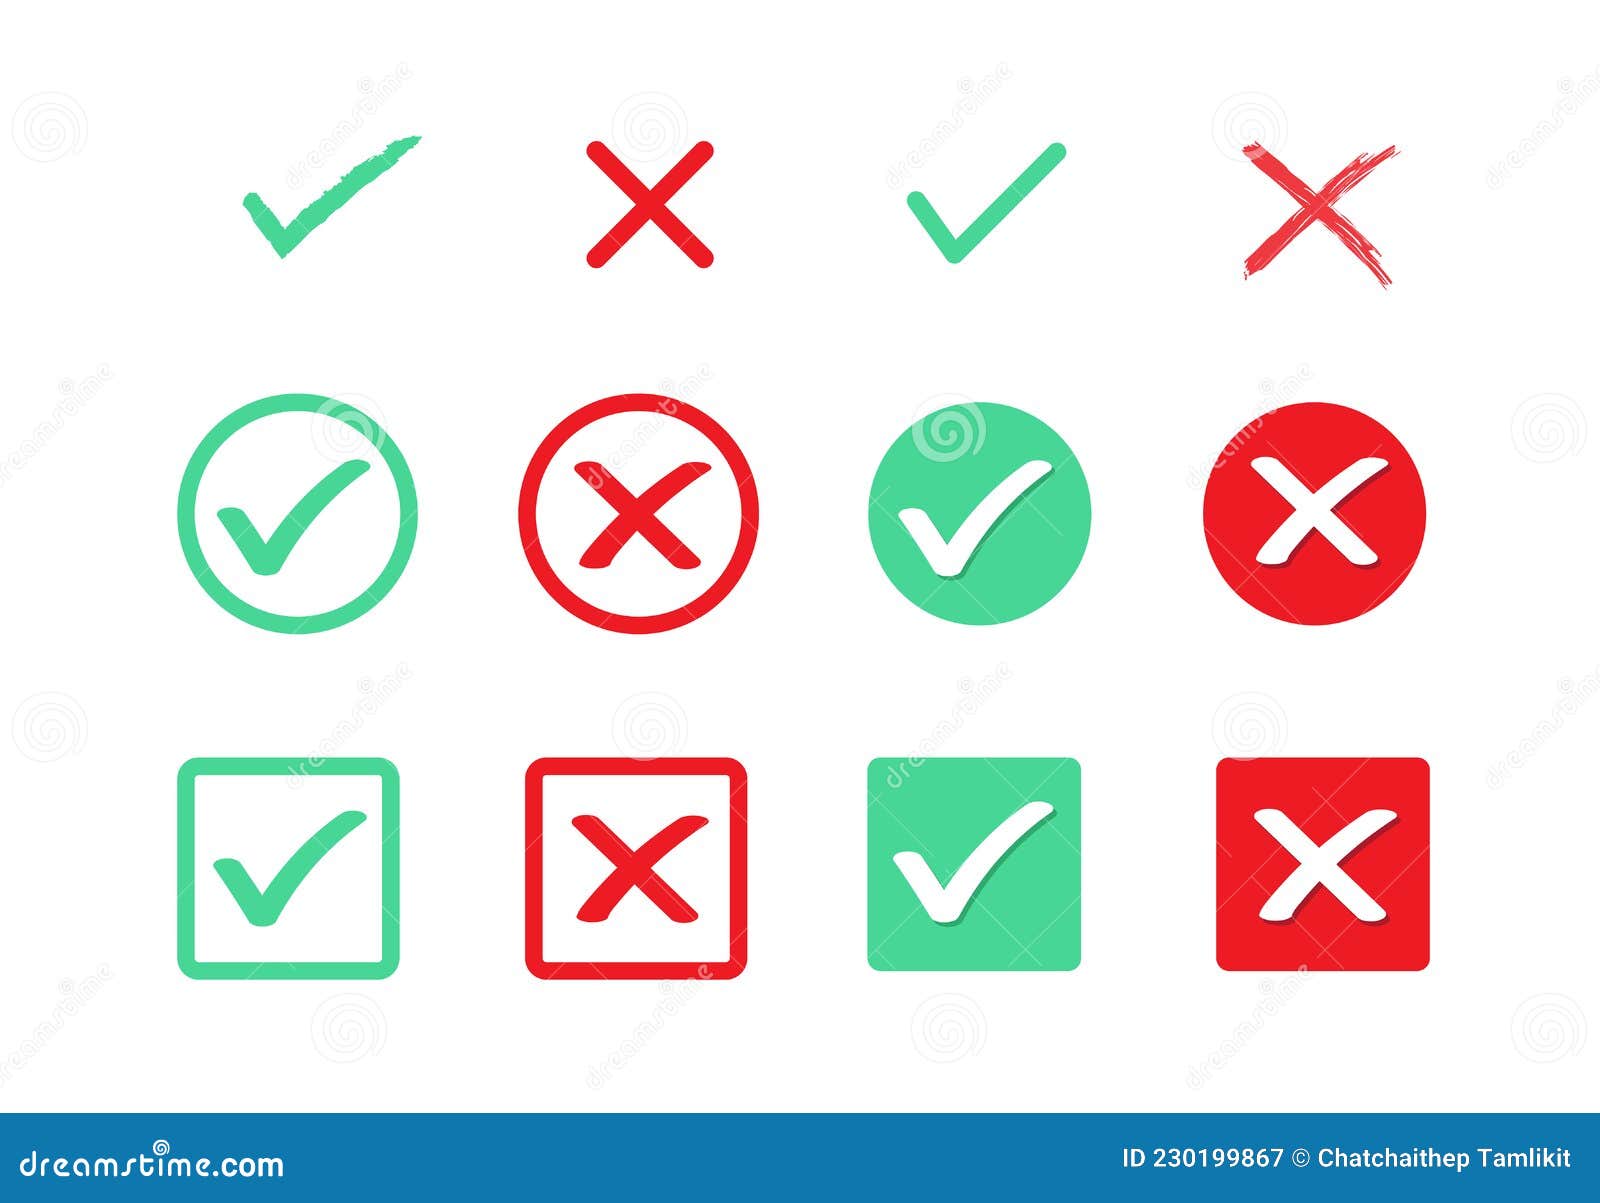 green check mark and red cross icon. set of true and false icons.  